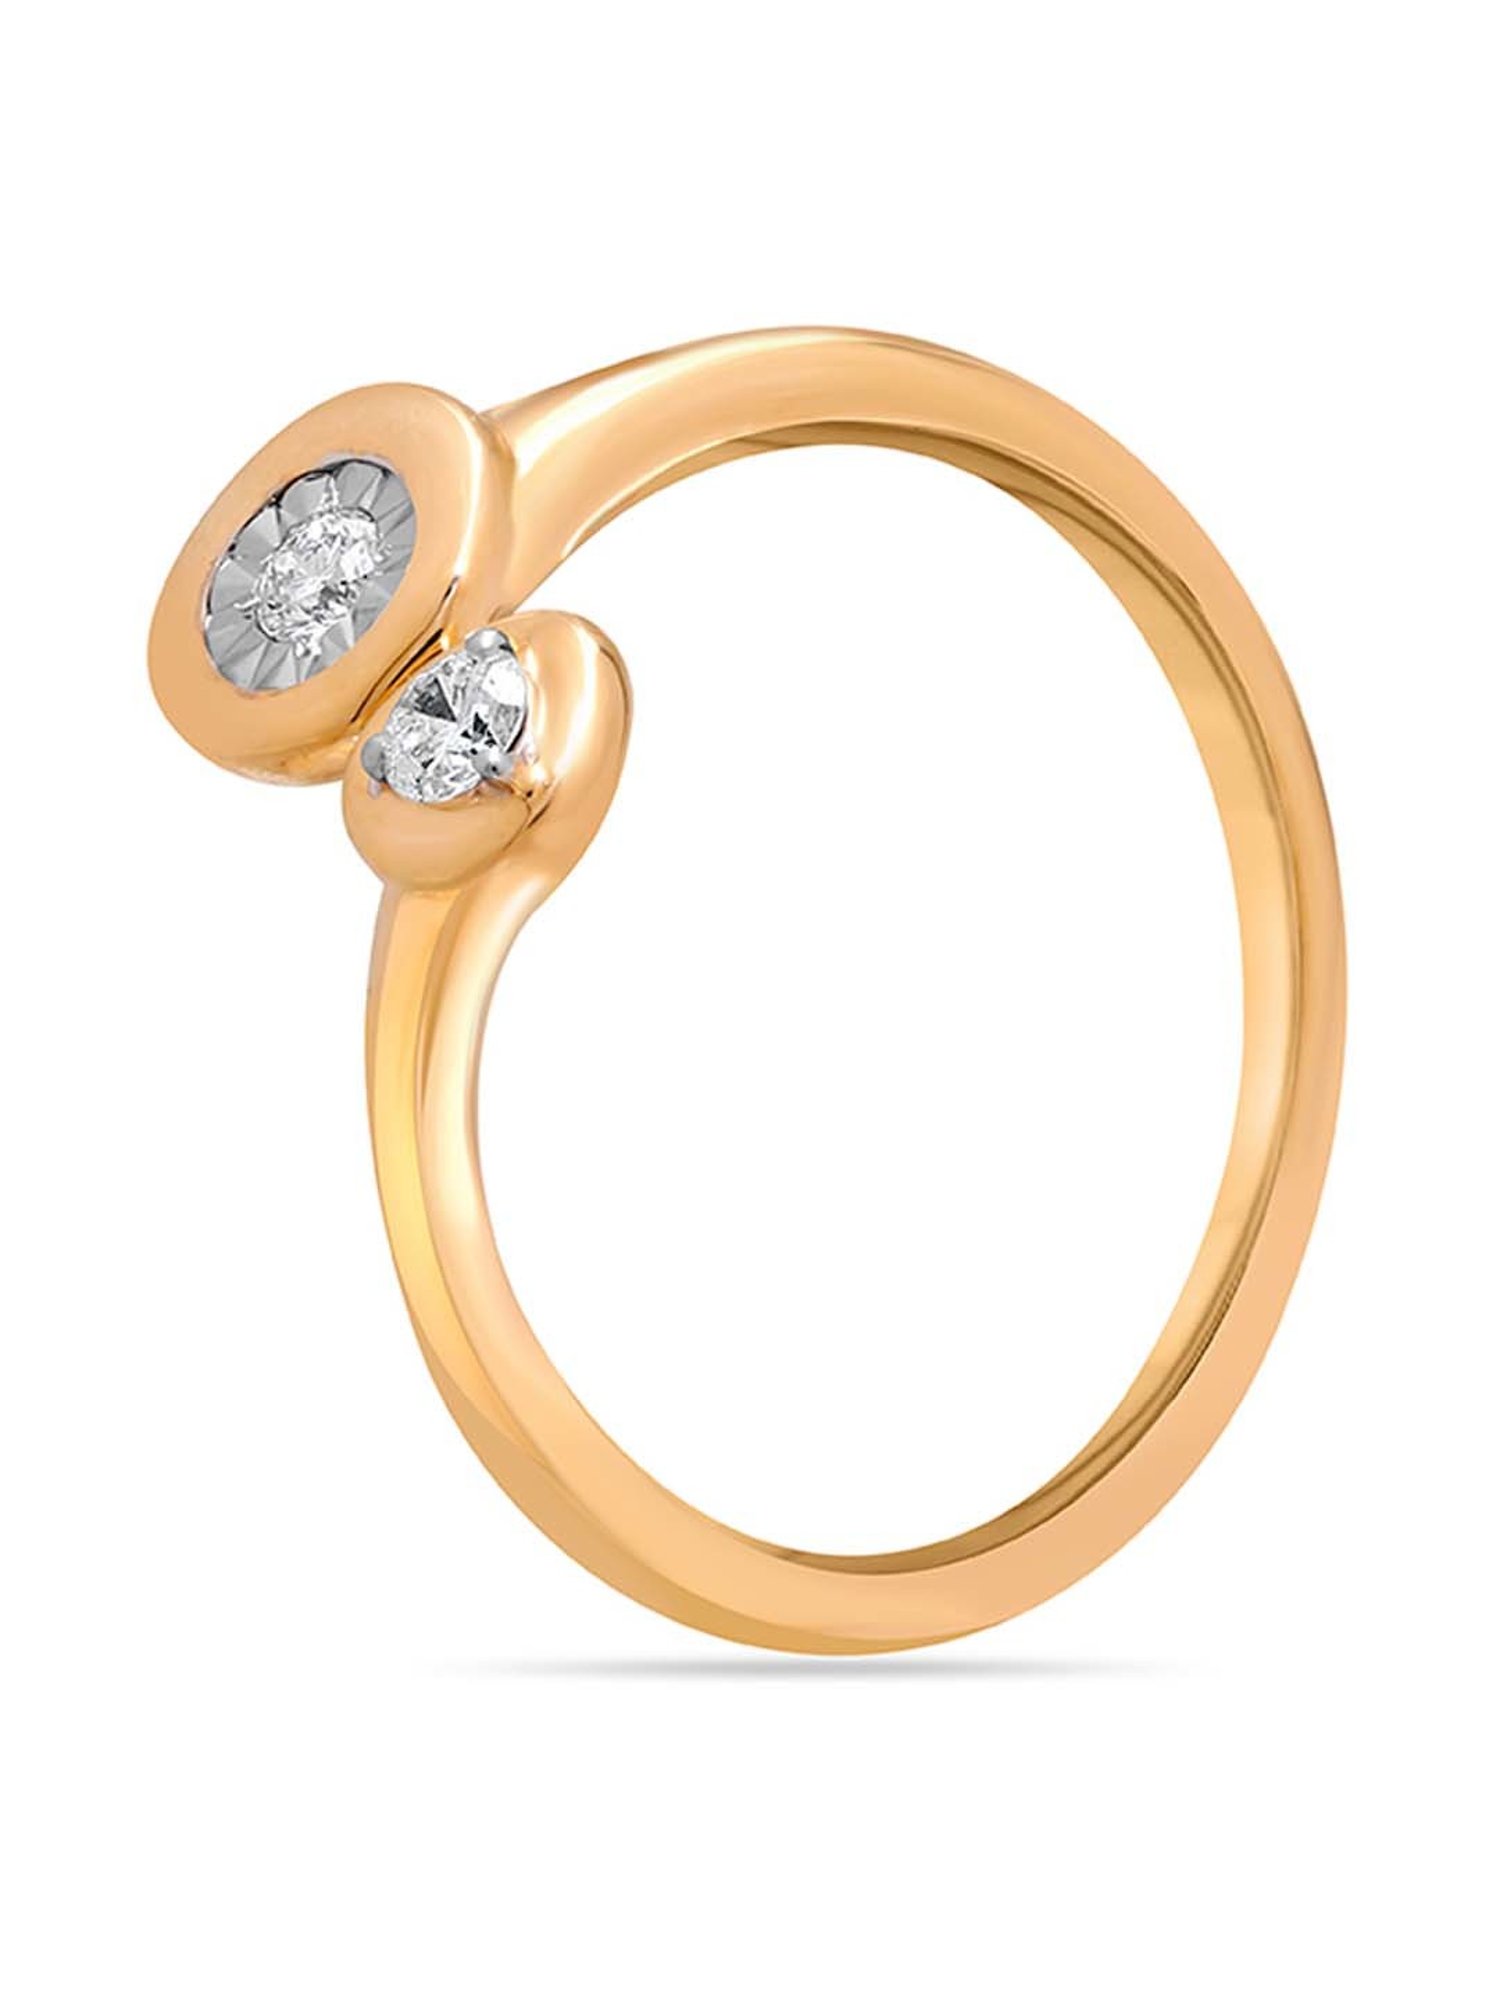 Mia by Tanishq 14 Kt Yellow Gold Unique Relationships Diamond Ring 14kt  Yellow Gold ring Price in India - Buy Mia by Tanishq 14 Kt Yellow Gold  Unique Relationships Diamond Ring 14kt